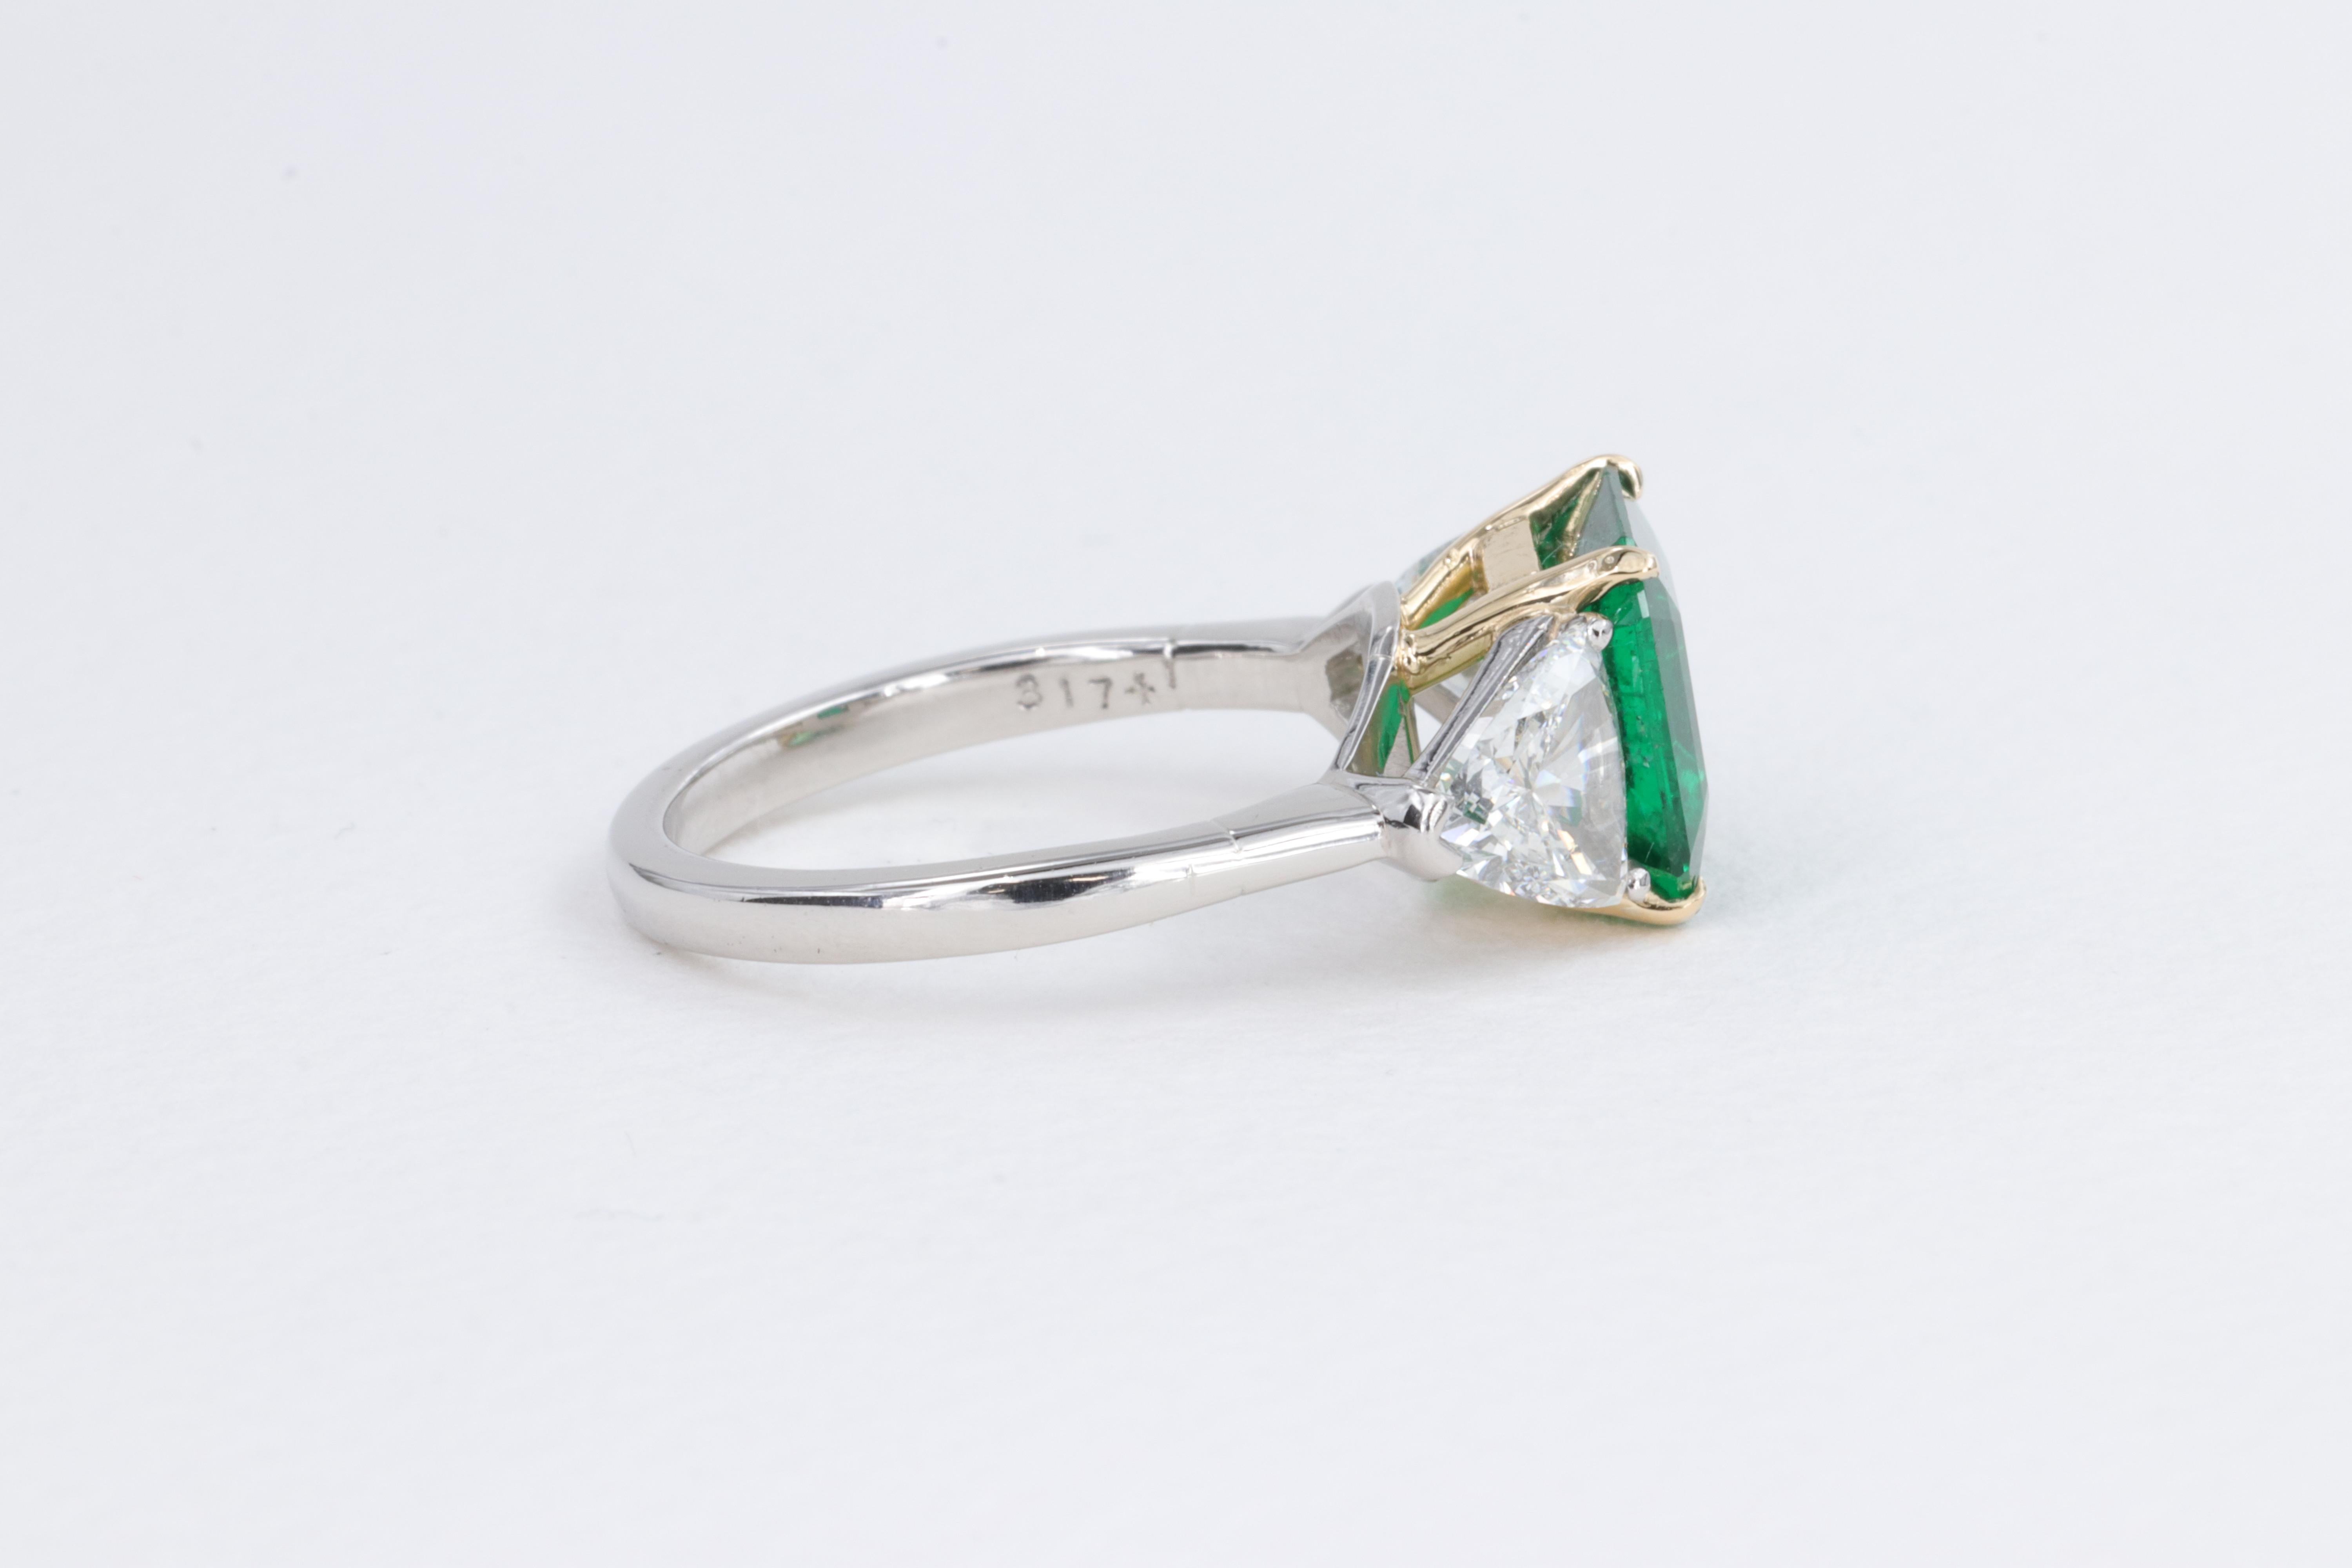 Women's or Men's 2.78ct Minor Oil Emerald A.G.L. Three Stone Ring with G.I.A. Trillions